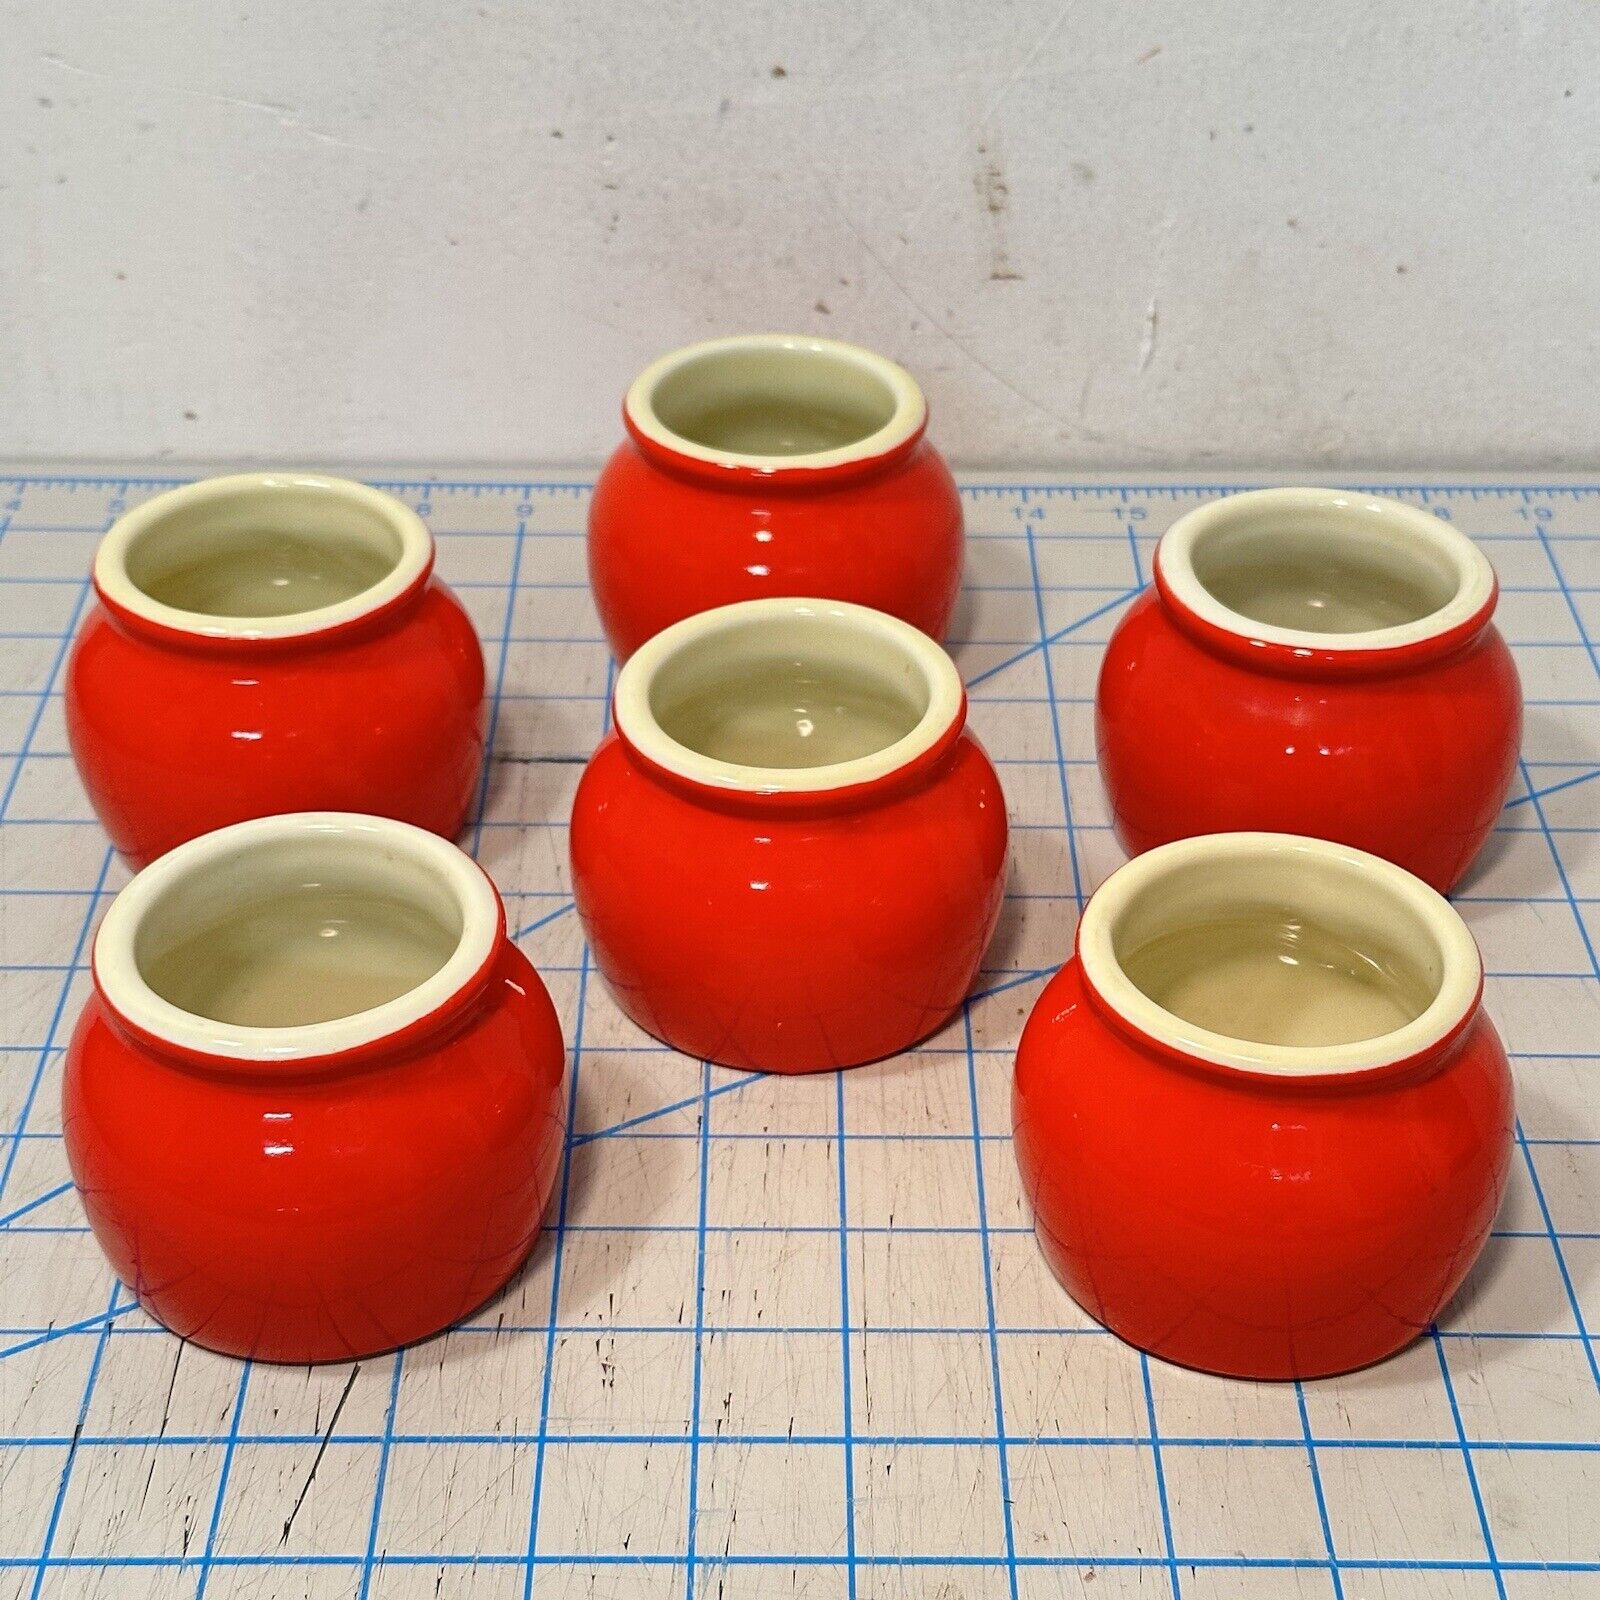 Hall’s Kitchenware Mini Red Bean Pots Made In USA Glazed Ceramic Crock Lot Of 6